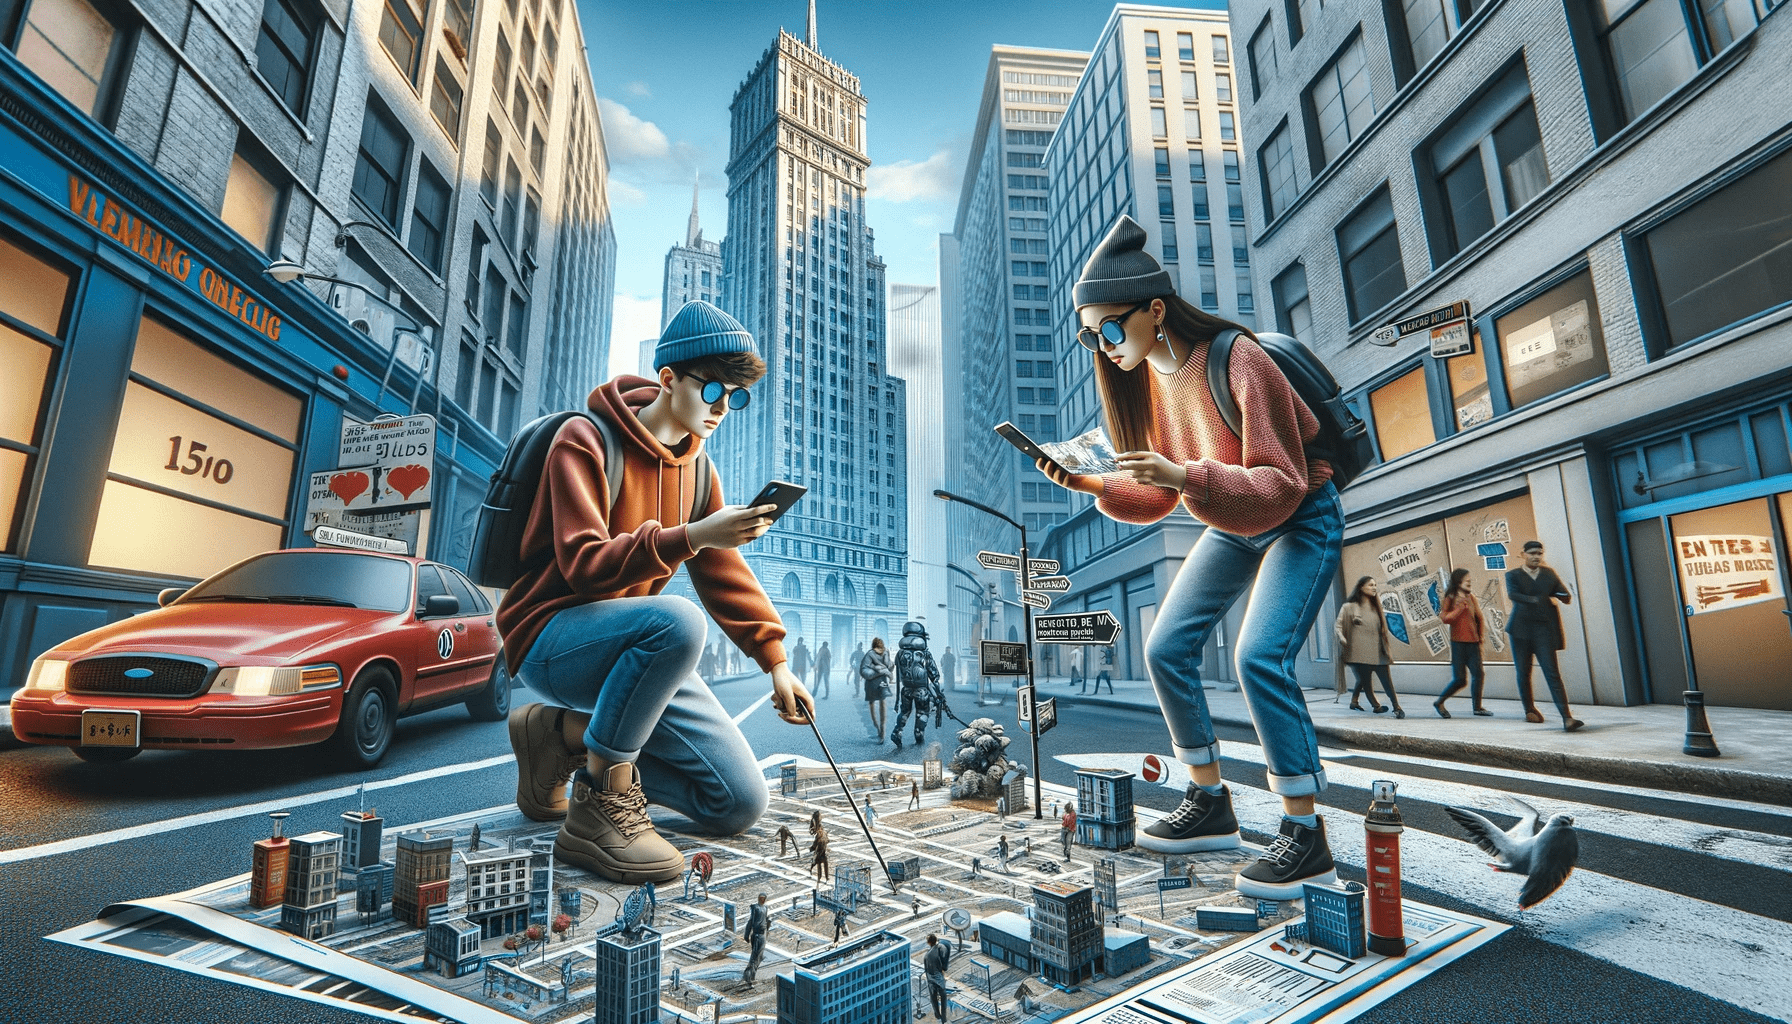 illustration of two Gen Z individuals playing a physical Alternate Reality Game in a city setting